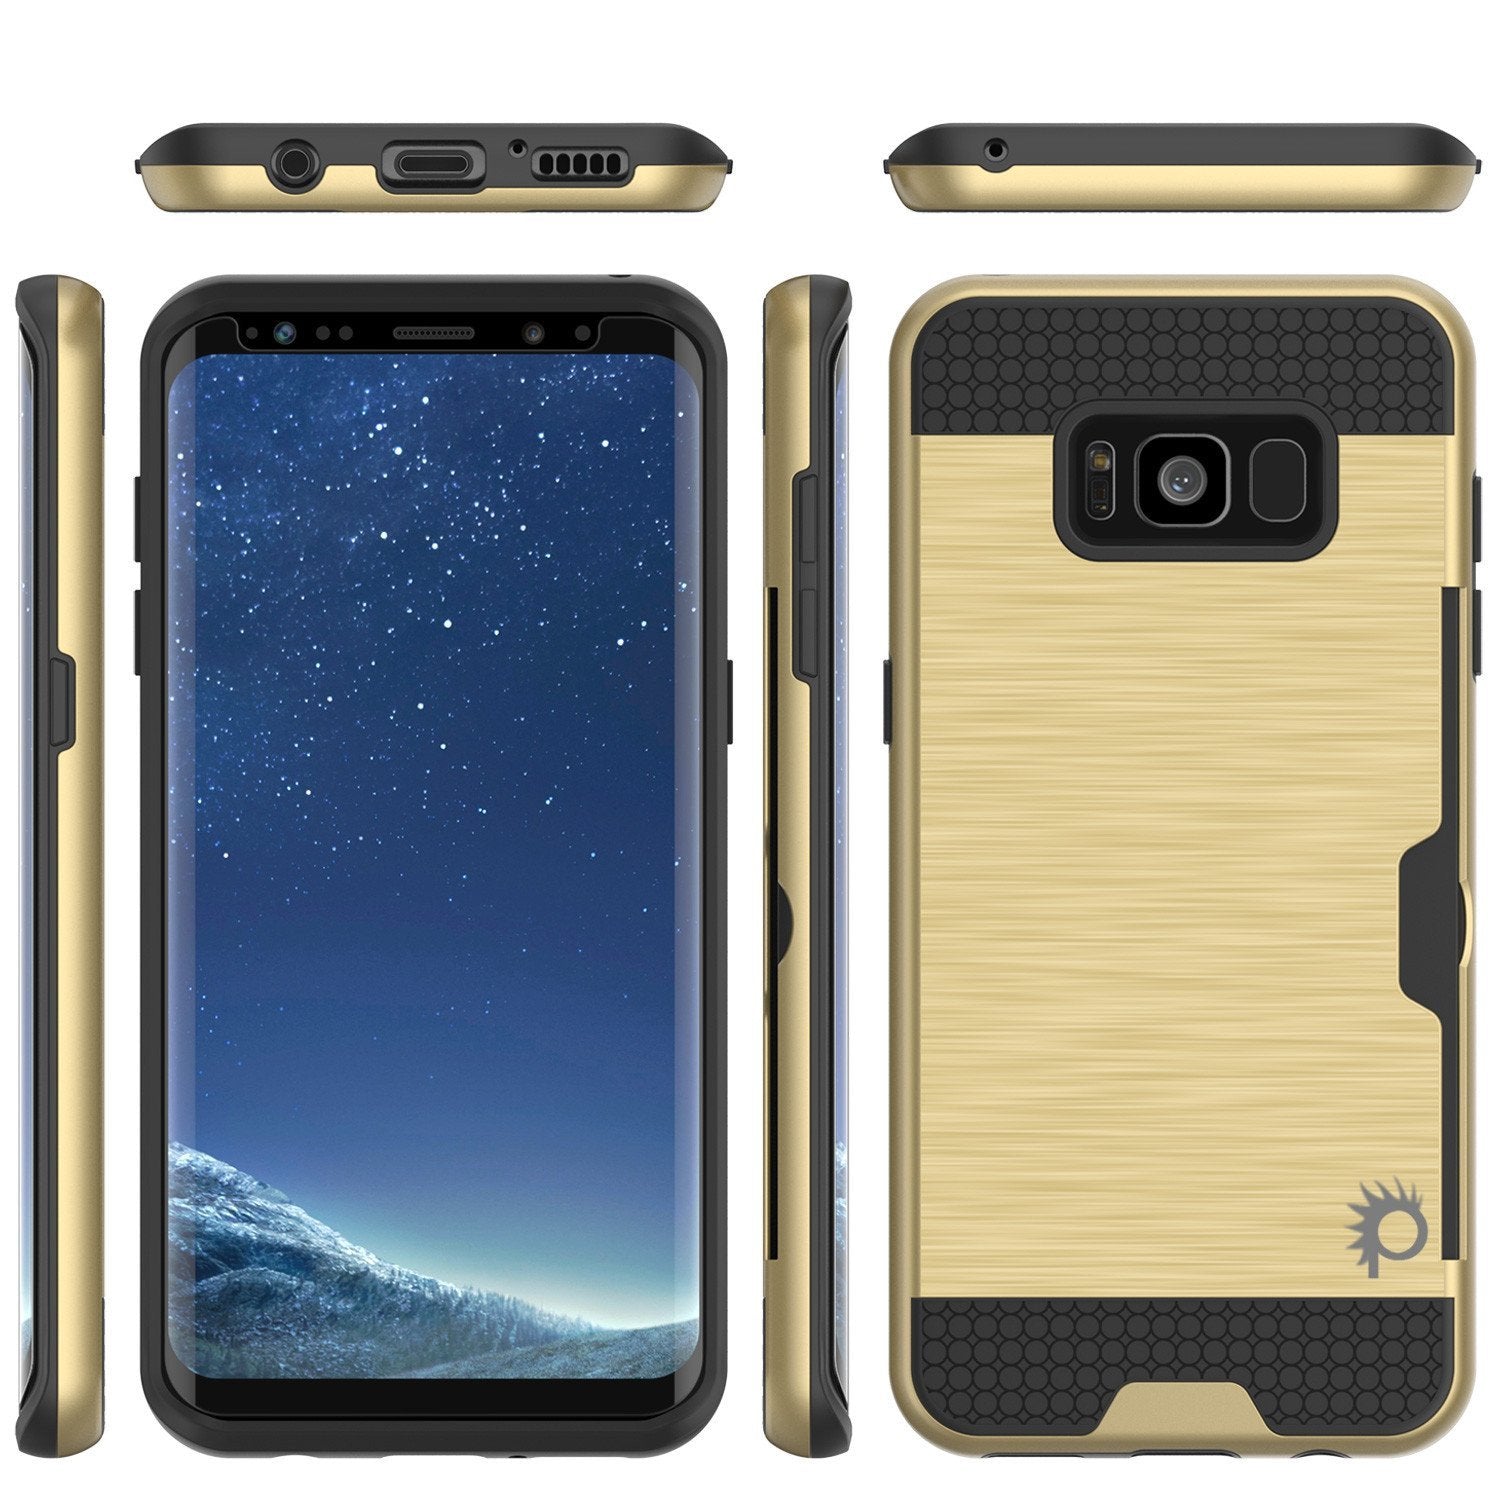 Galaxy S8 Case, PUNKcase [SLOT Series] [Slim Fit] Dual-Layer Armor Cover w/Integrated Anti-Shock System, Credit Card Slot & PUNKSHIELD Screen Protector for Samsung Galaxy S8 [Gold] - PunkCase NZ